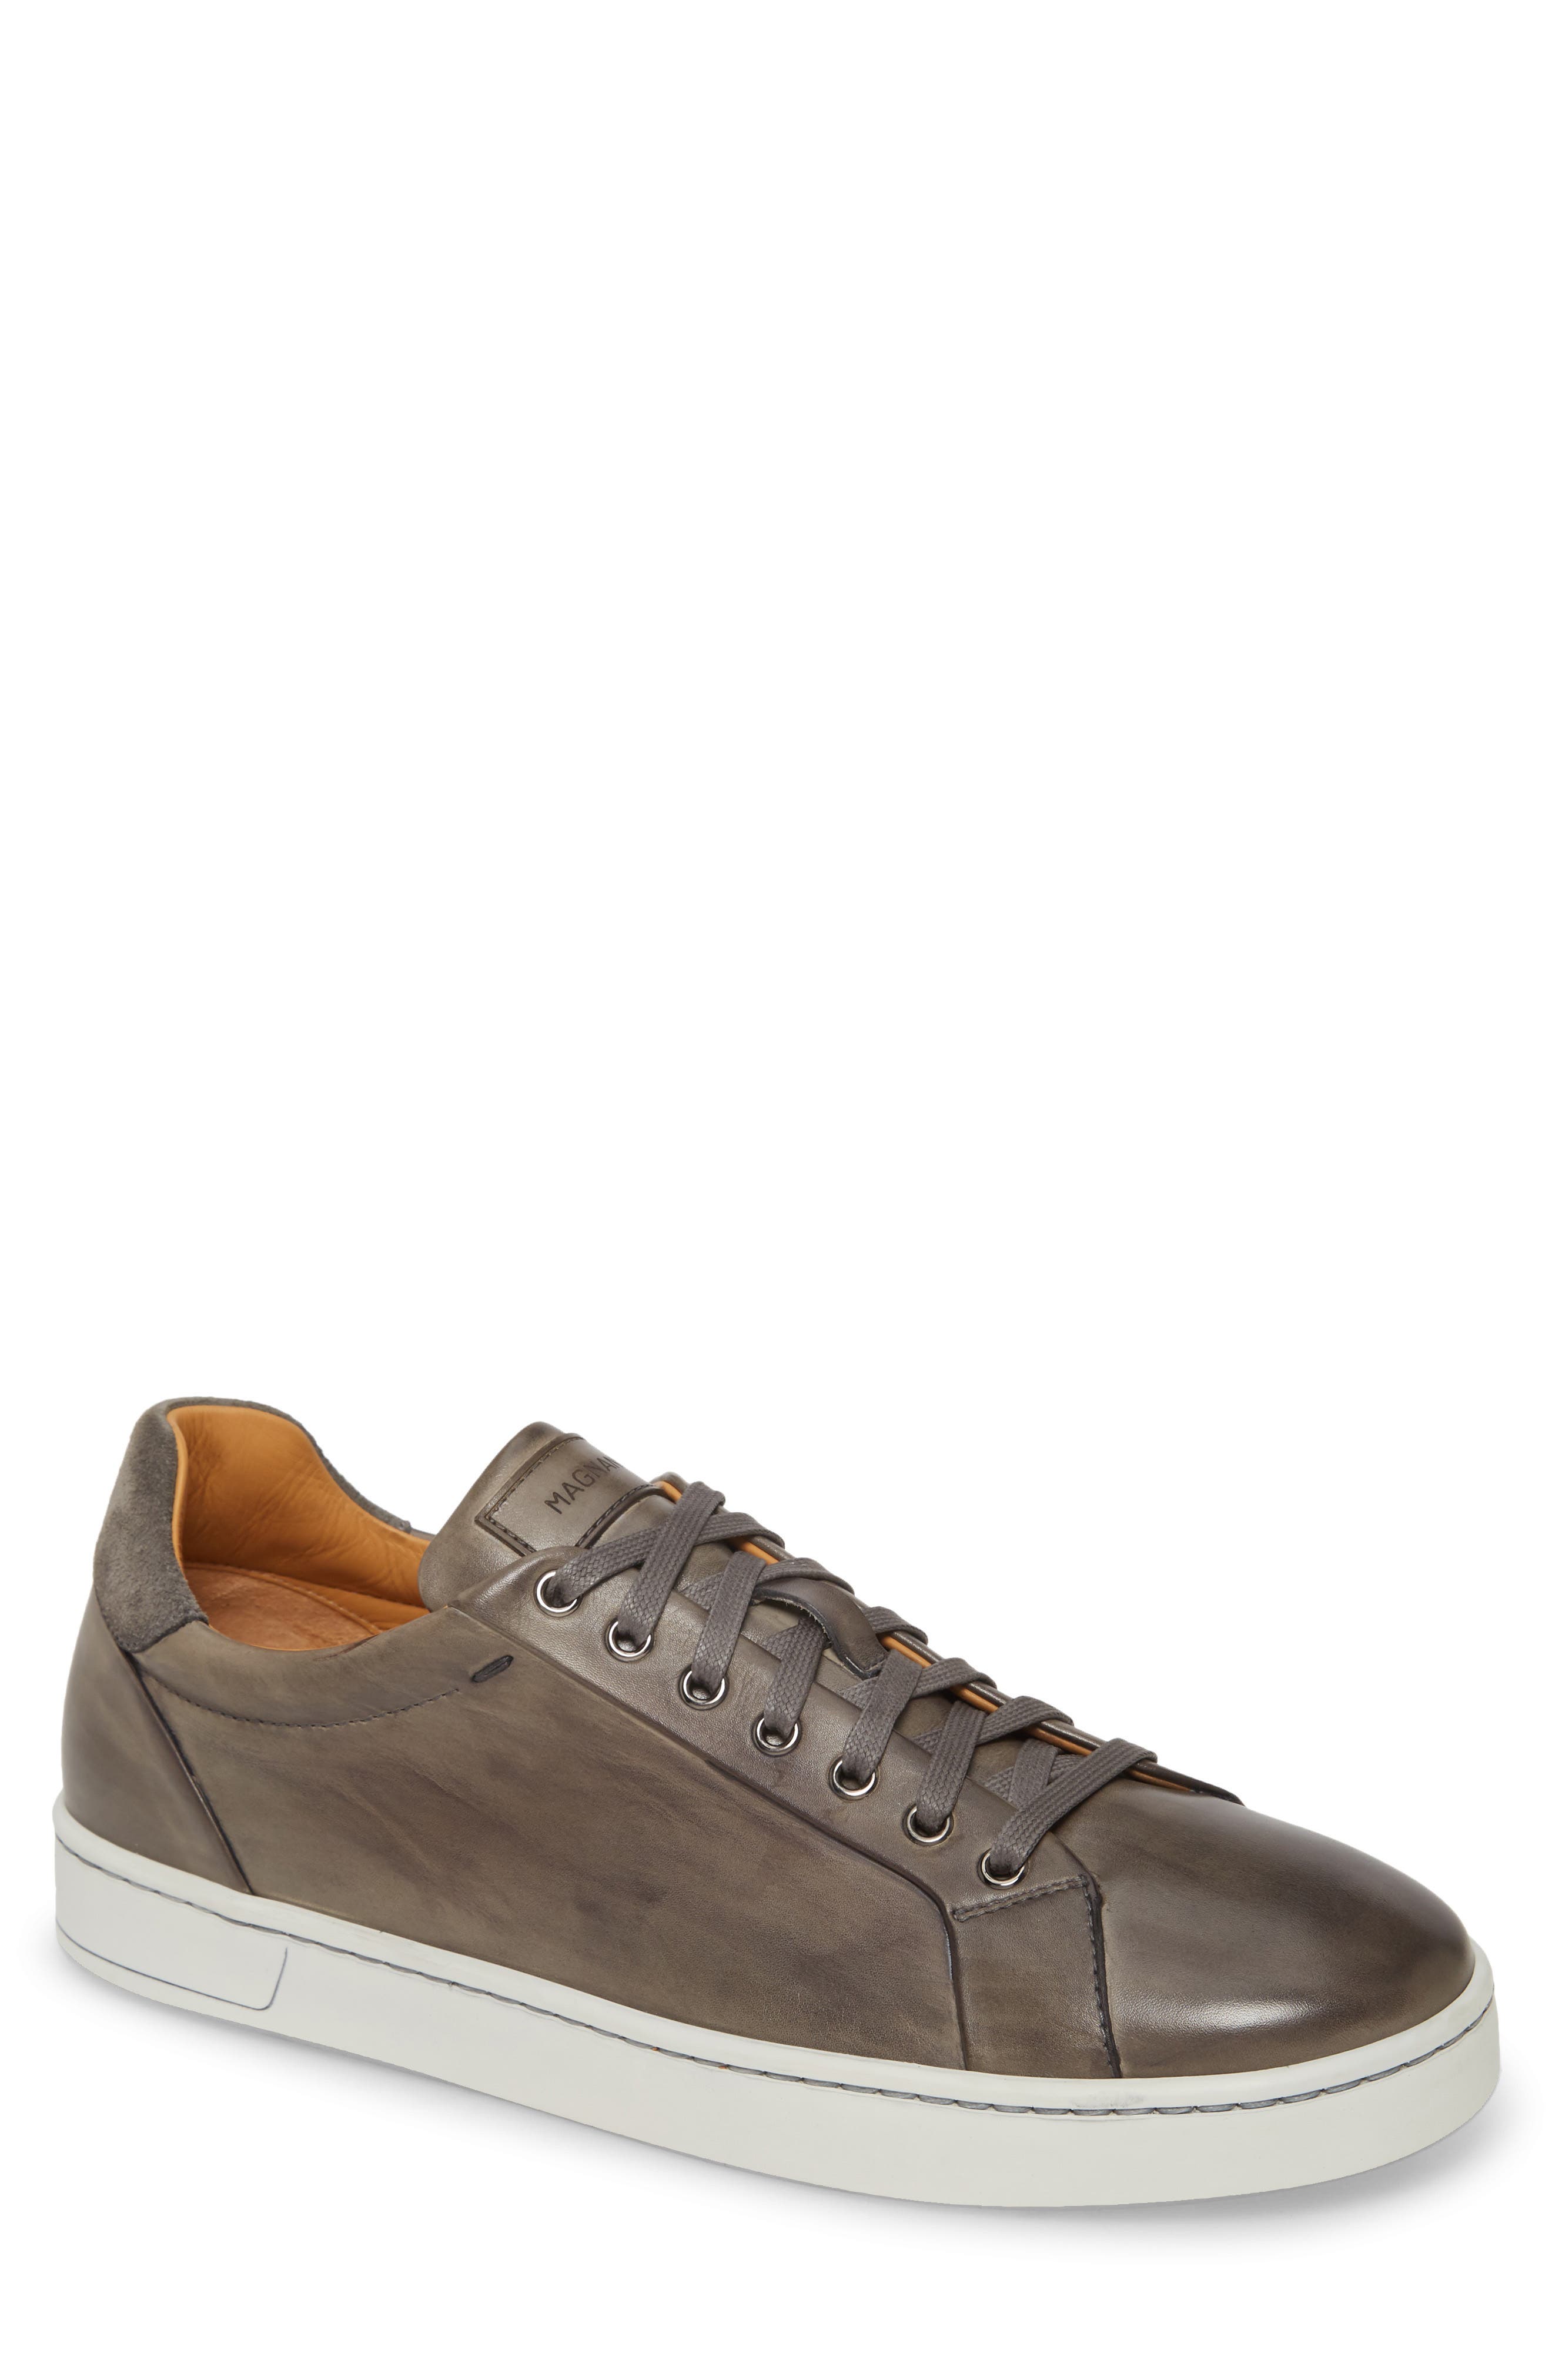 magnanni elonso low top sneaker